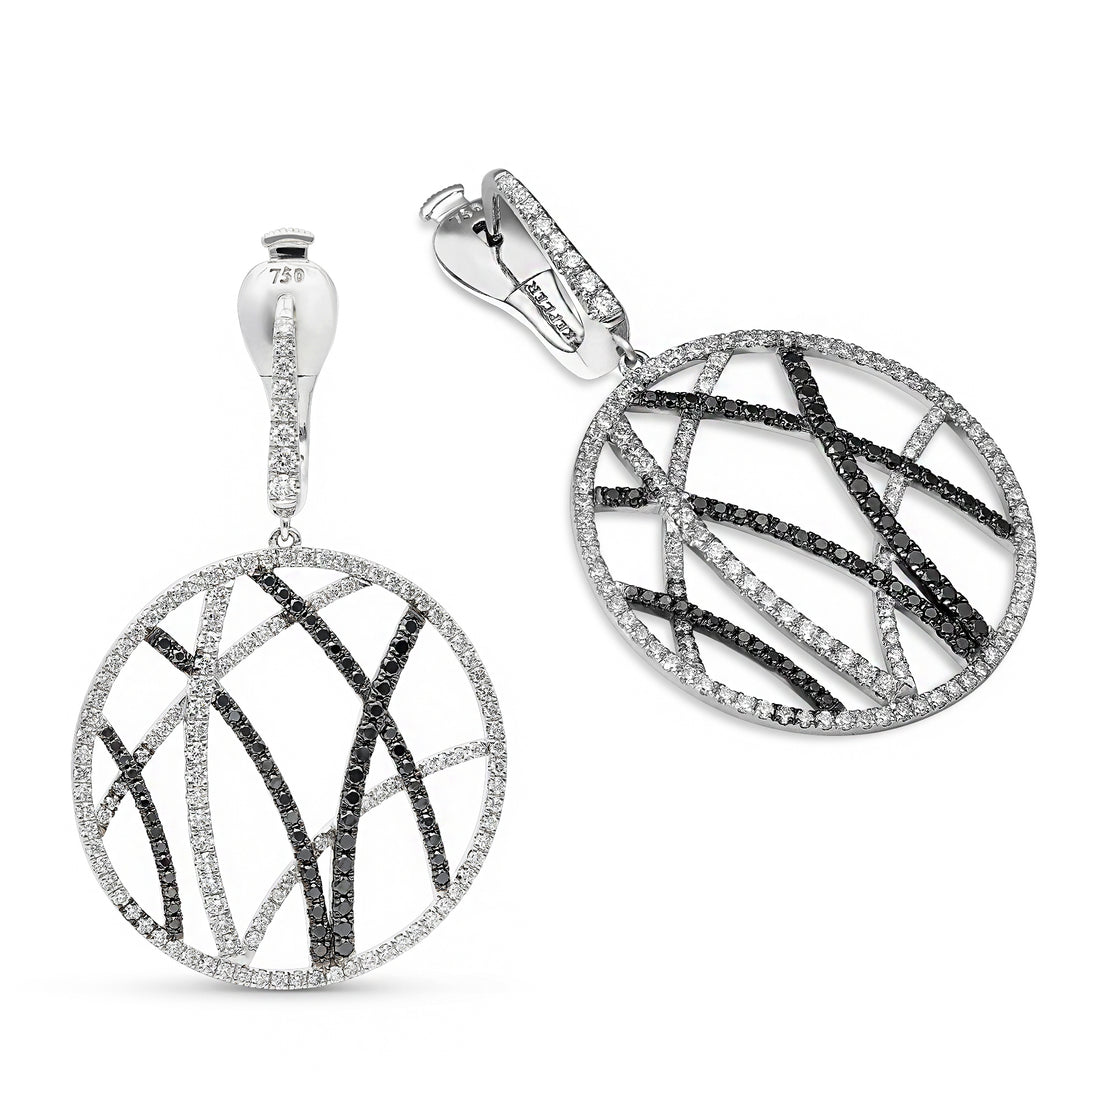 White and Black Diamond Bamboo Forest Circle Drop Earrings